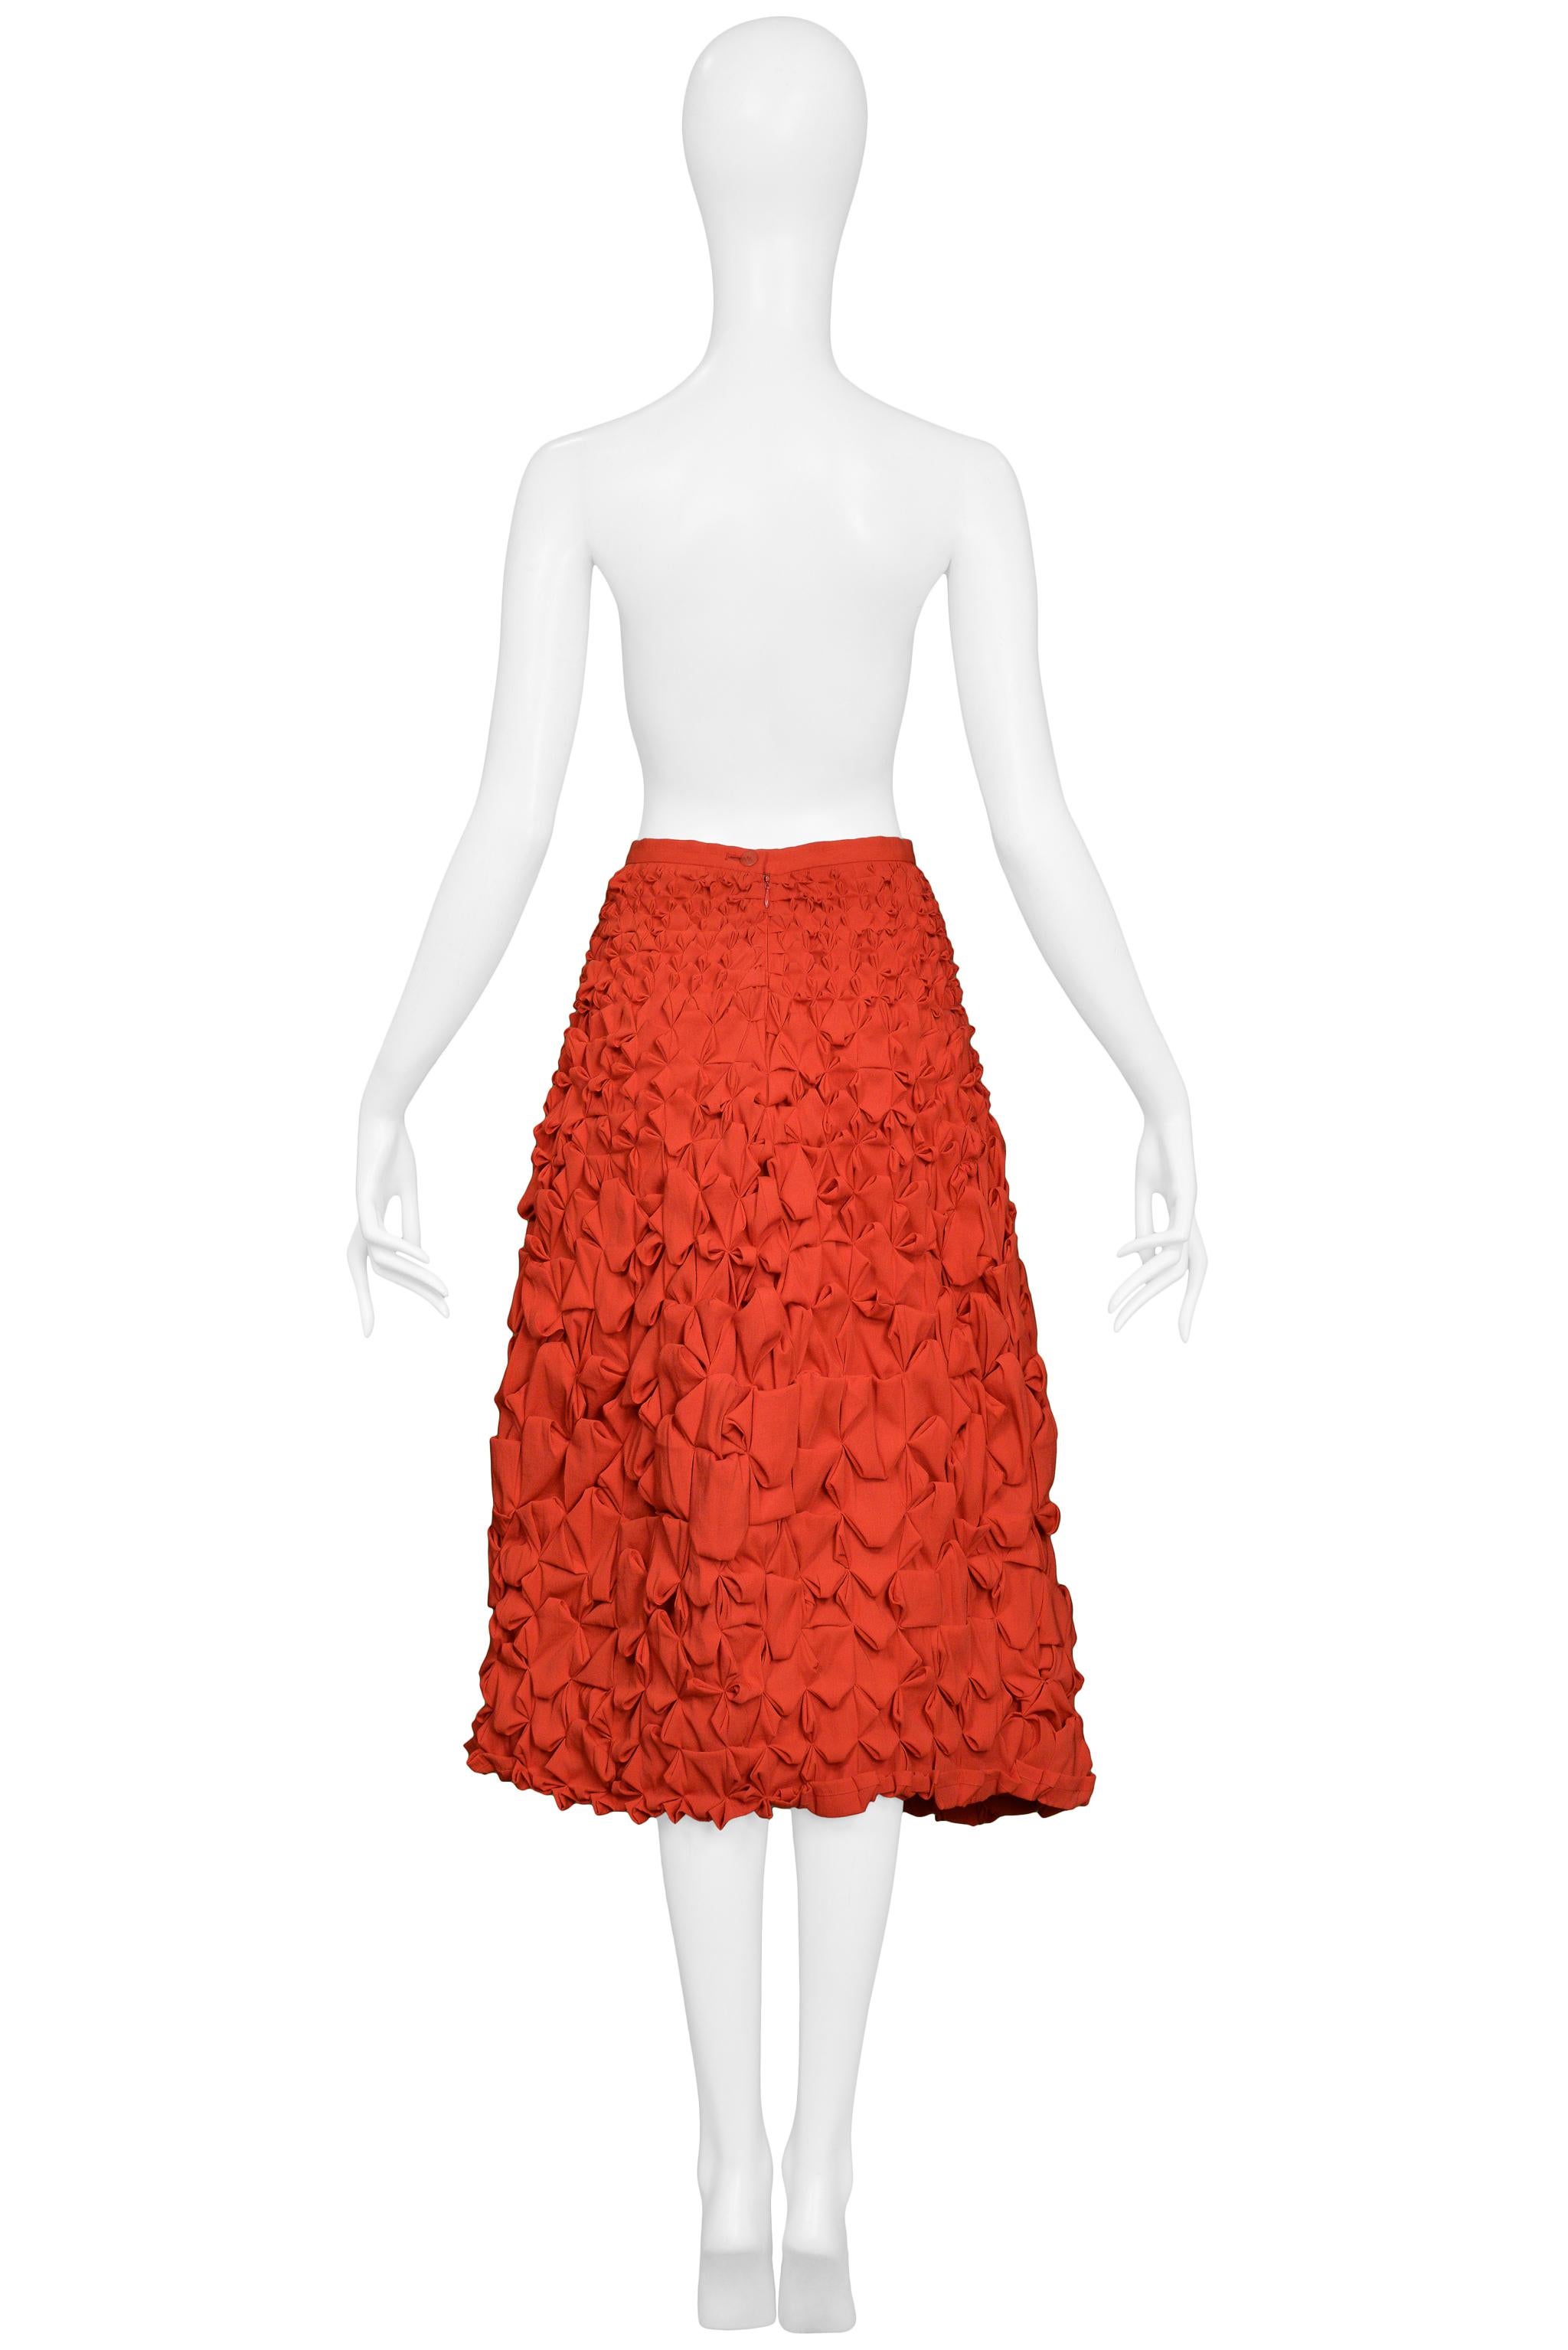 Issey Miyake Red Abstract Pleat Skirt In Excellent Condition For Sale In Los Angeles, CA